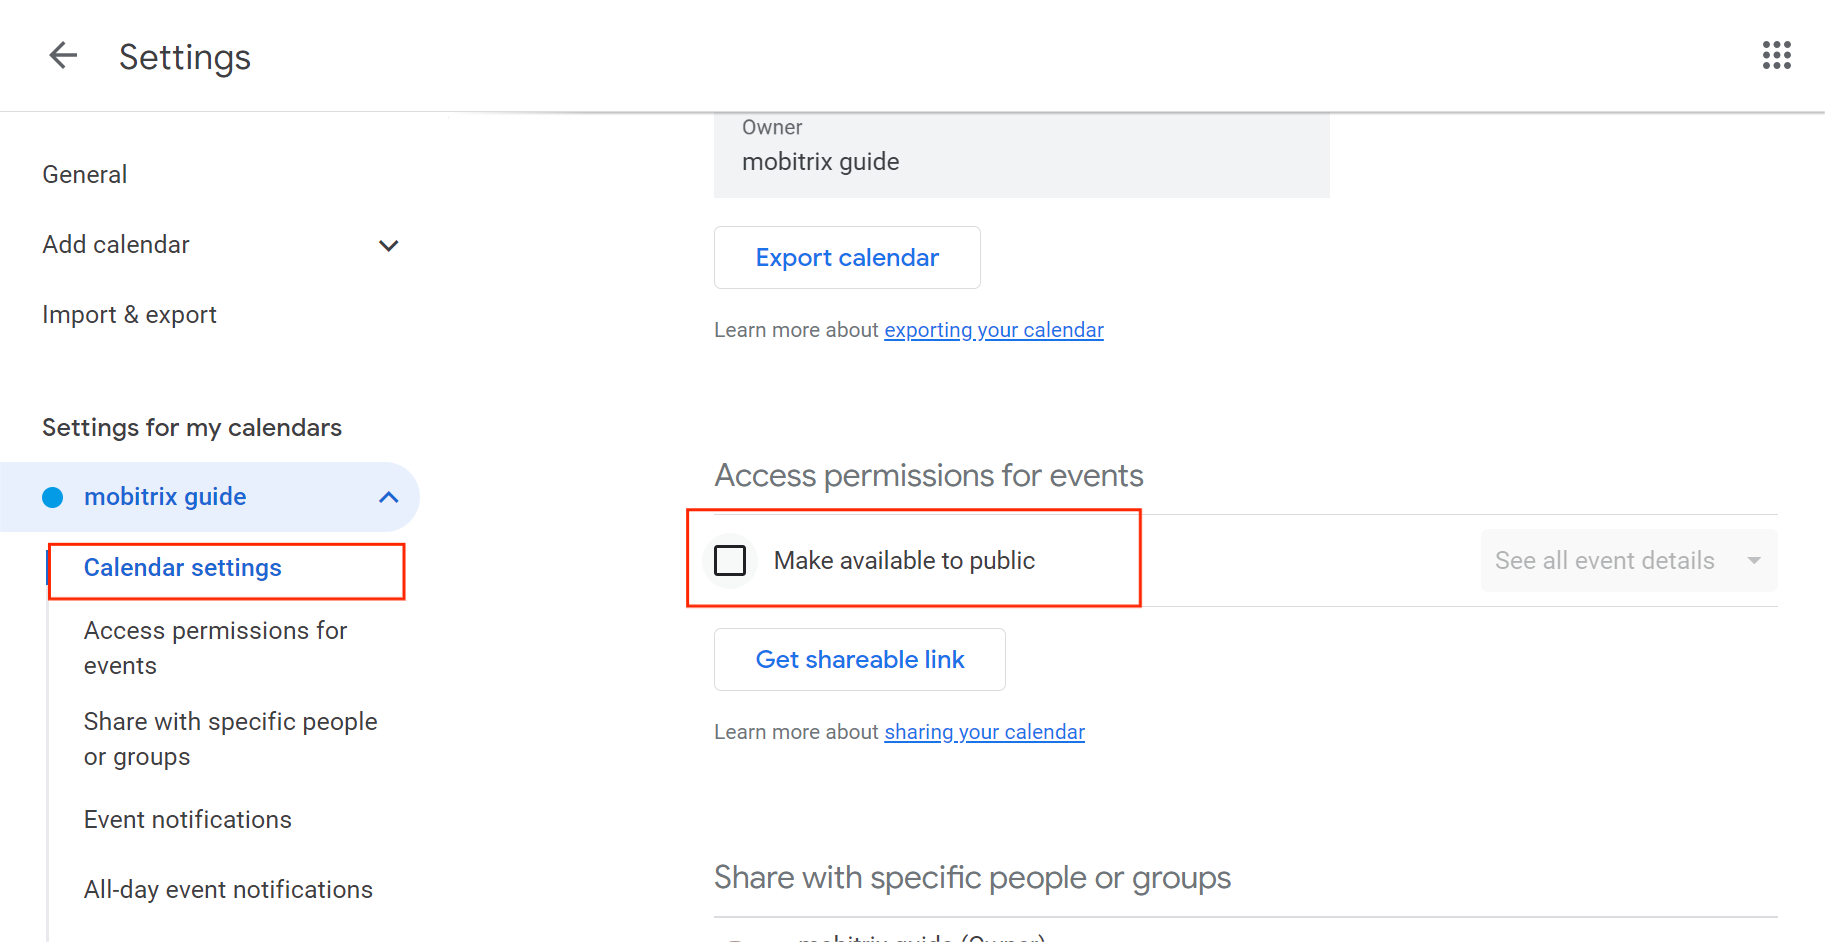 Iphone Ipad Icloud Calendar Sharing Access Permissions Make Available To Public